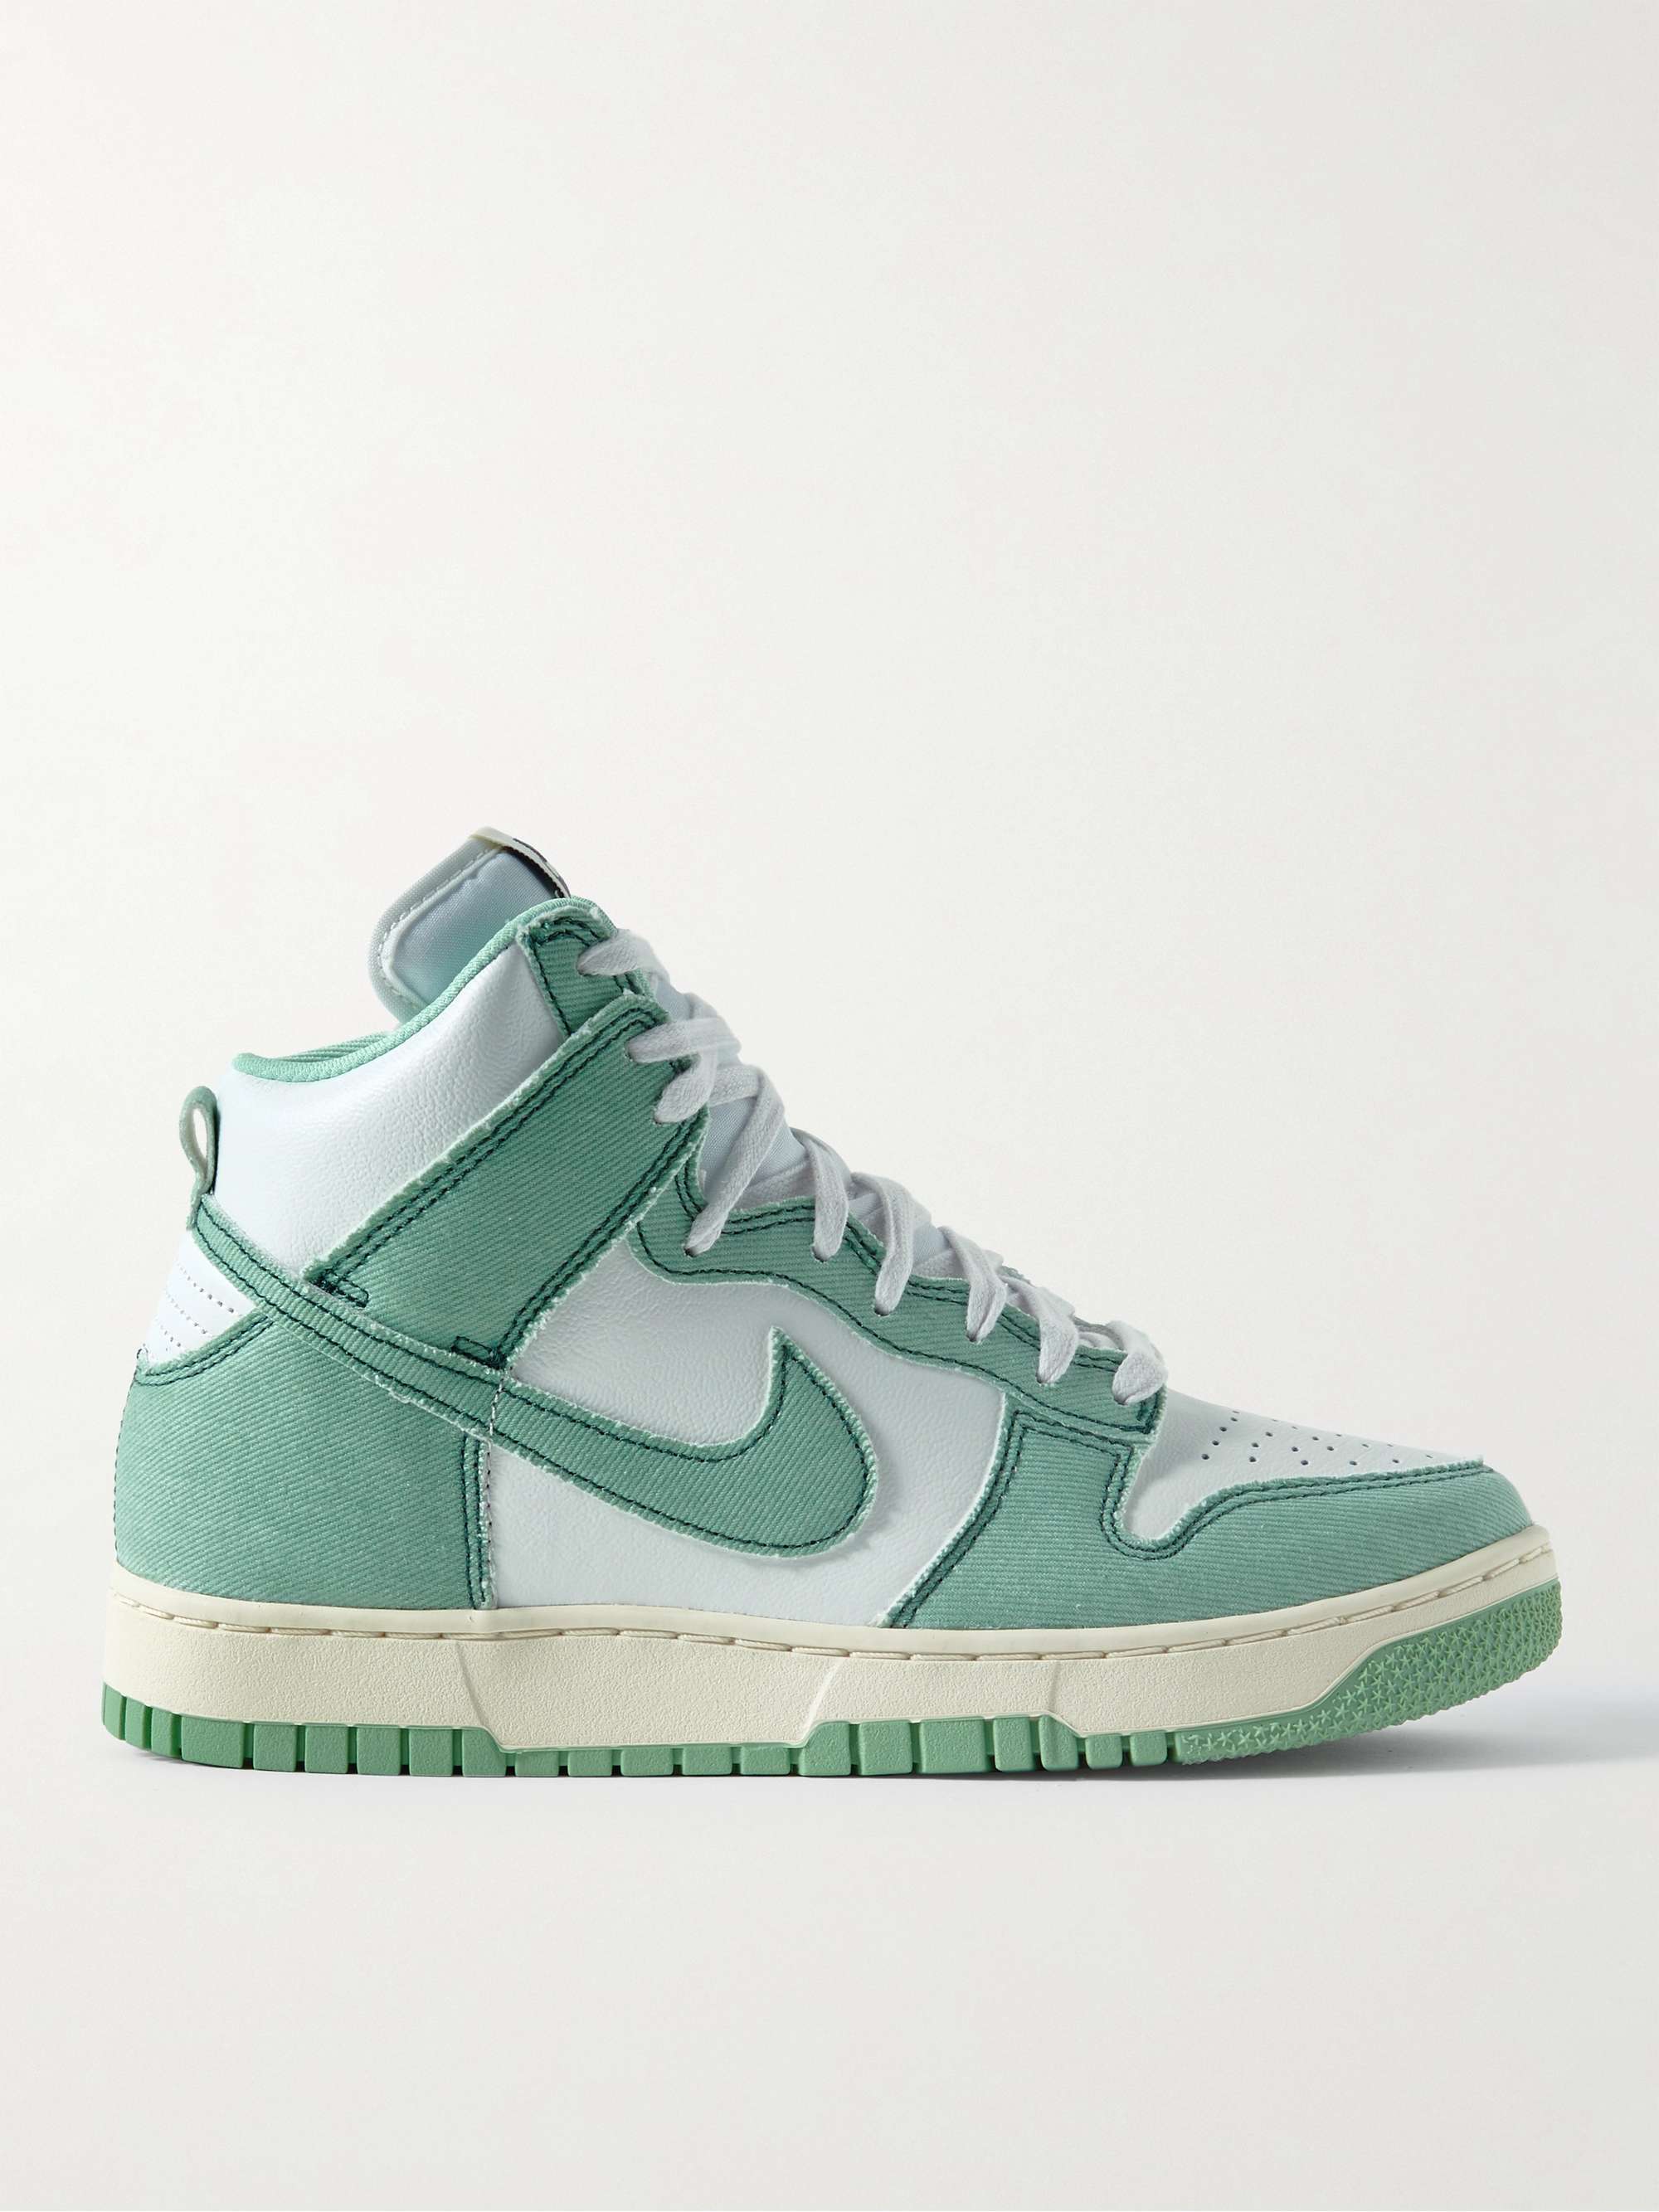 Mint Dunk Hi 1985 Denim and Leather High-Top Sneakers | NIKE | MR PORTER